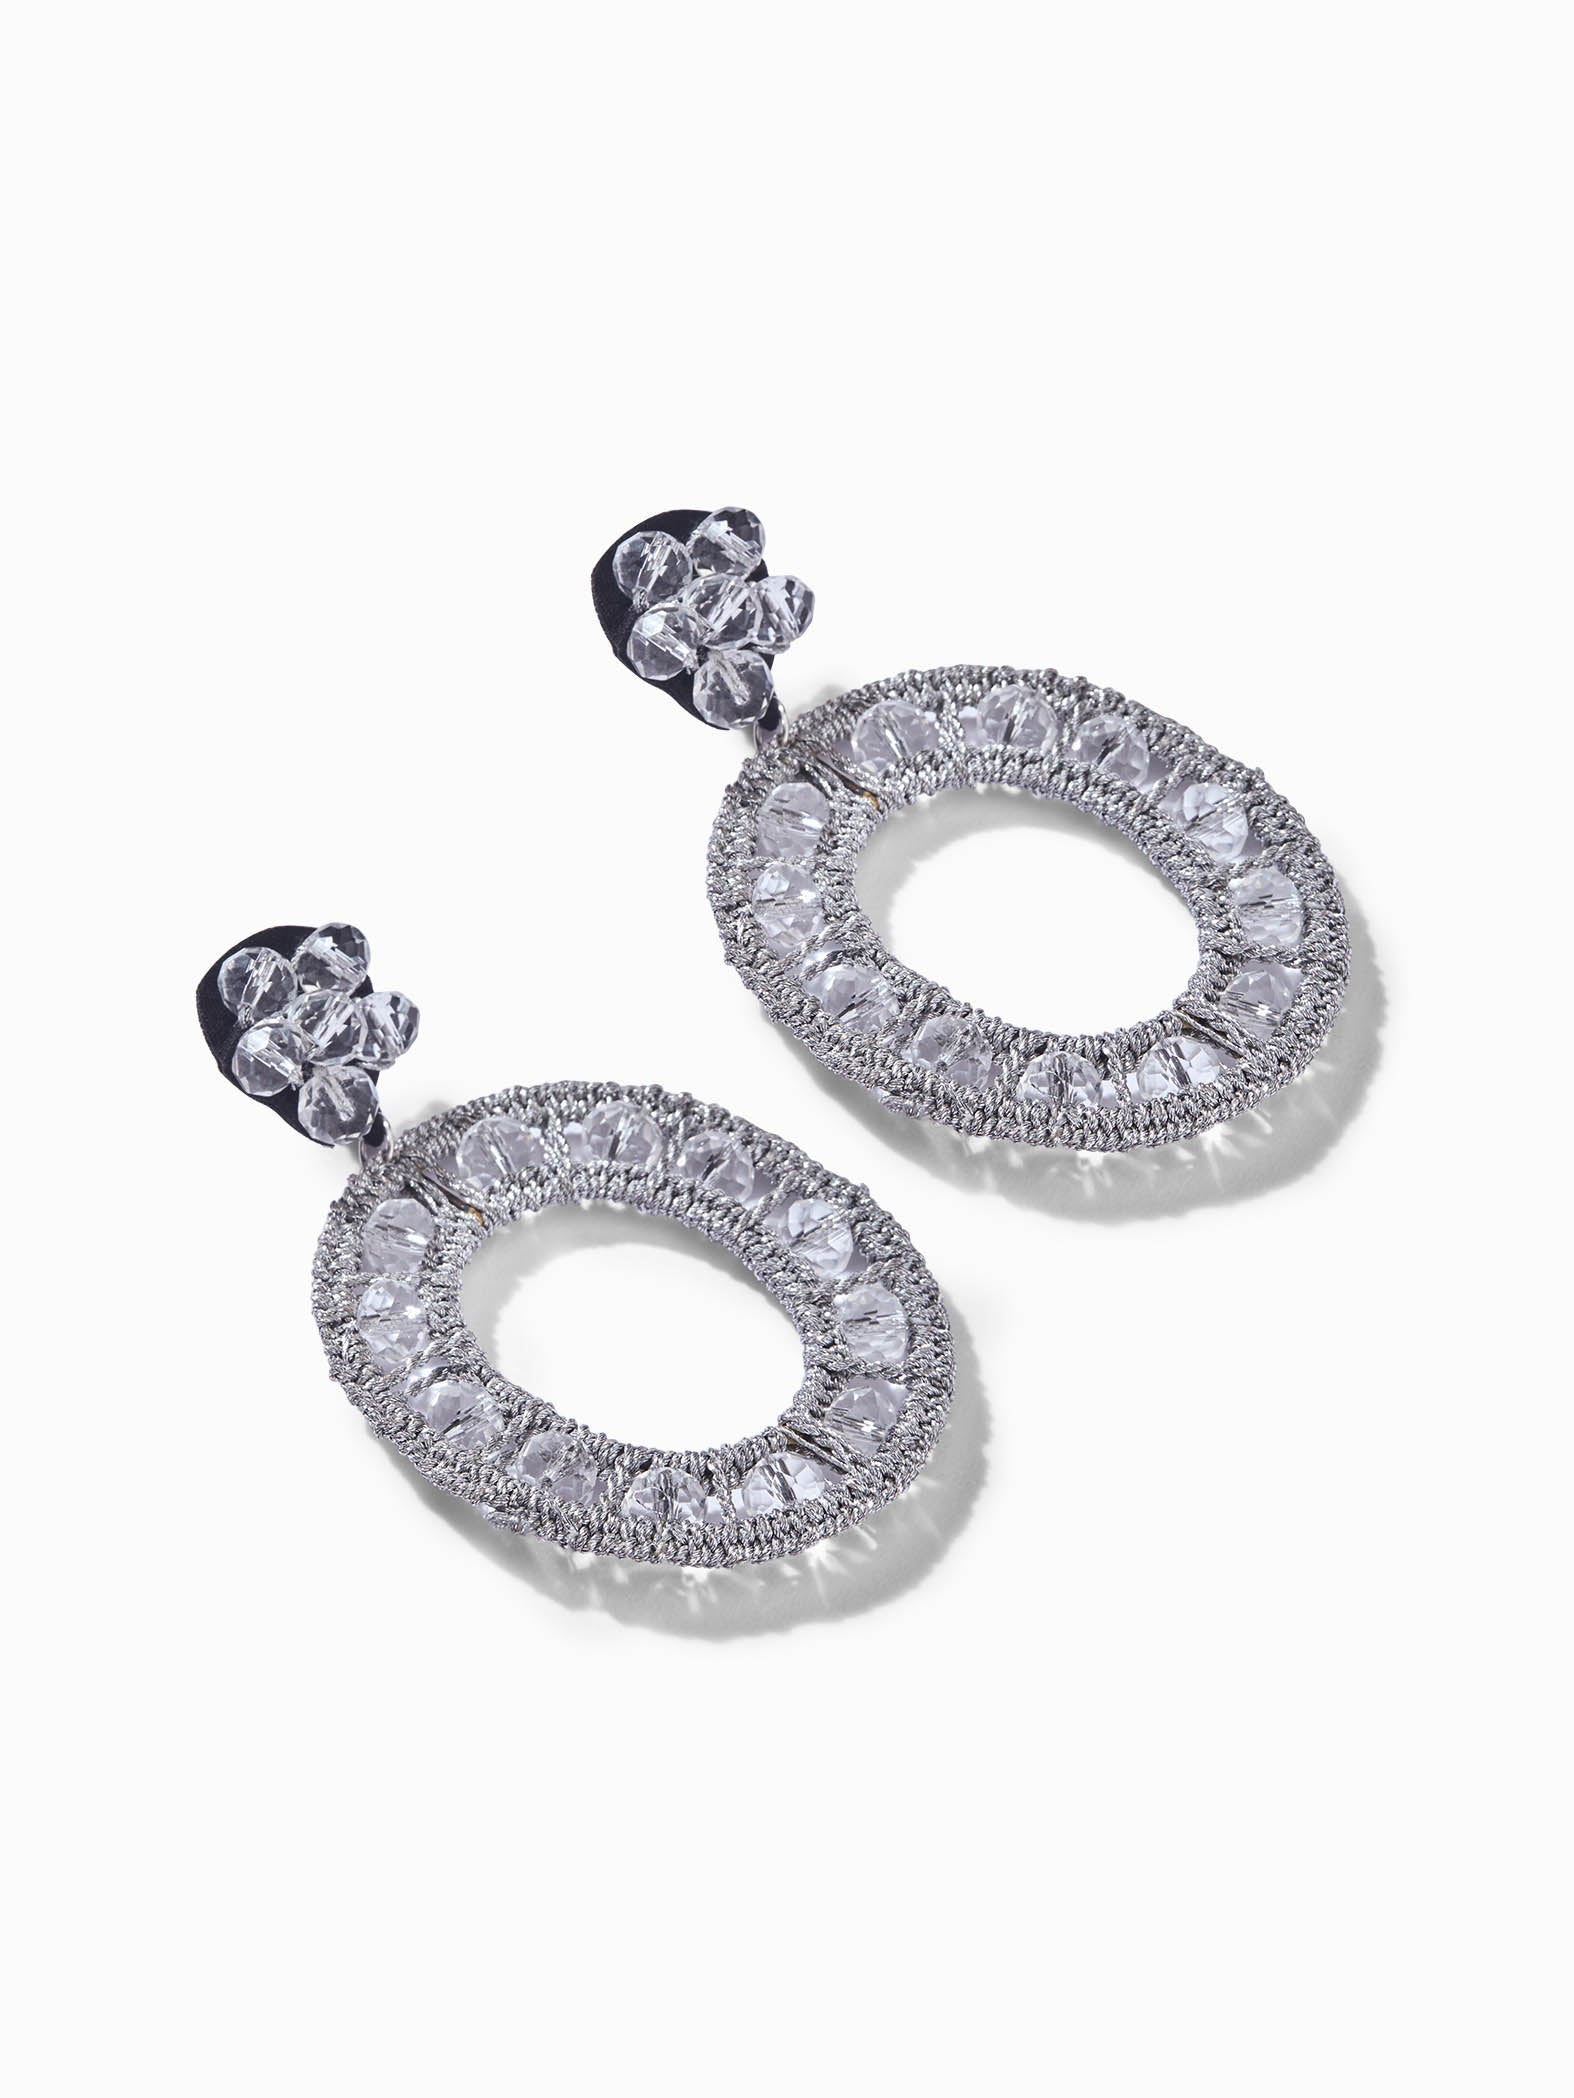 Silver Round Crystal Earrings